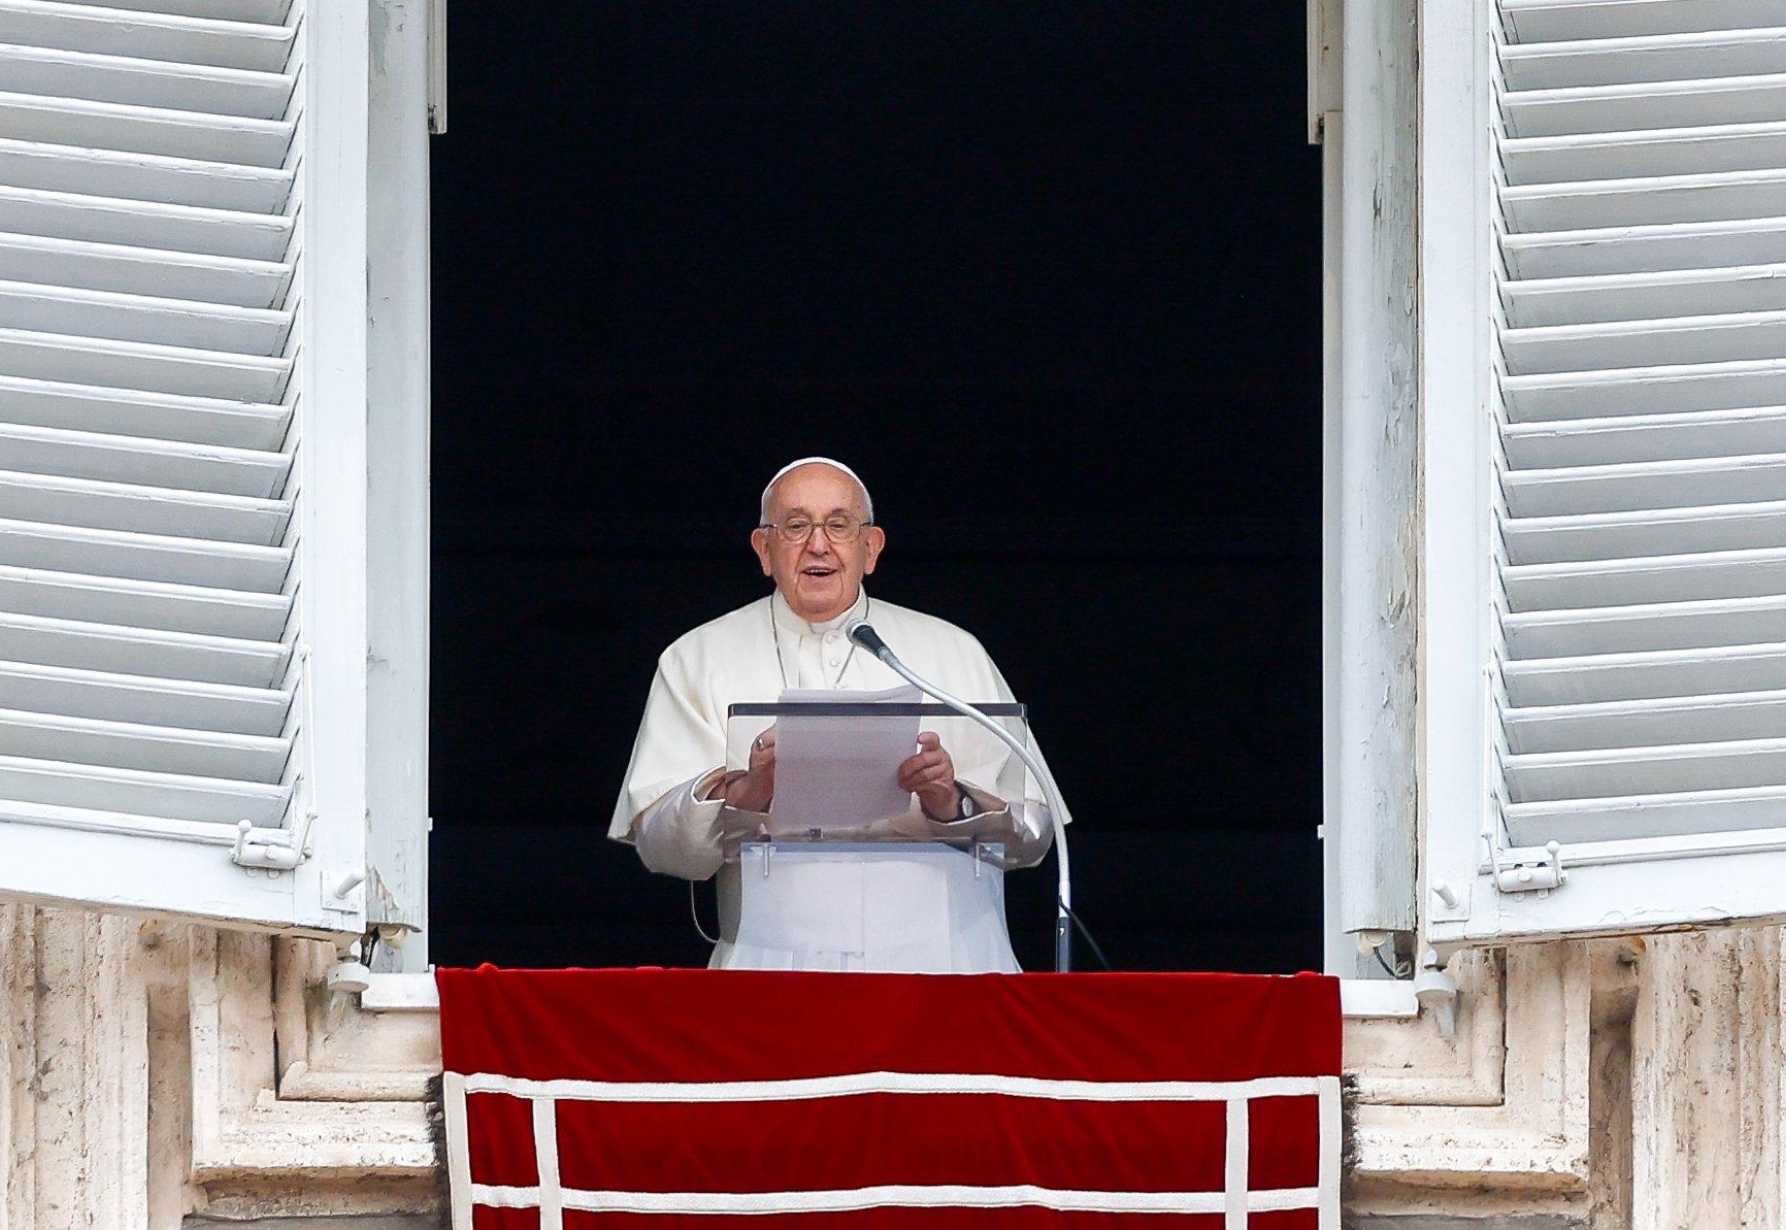 Learn about the lives of saints, be moved by their examples, pope says